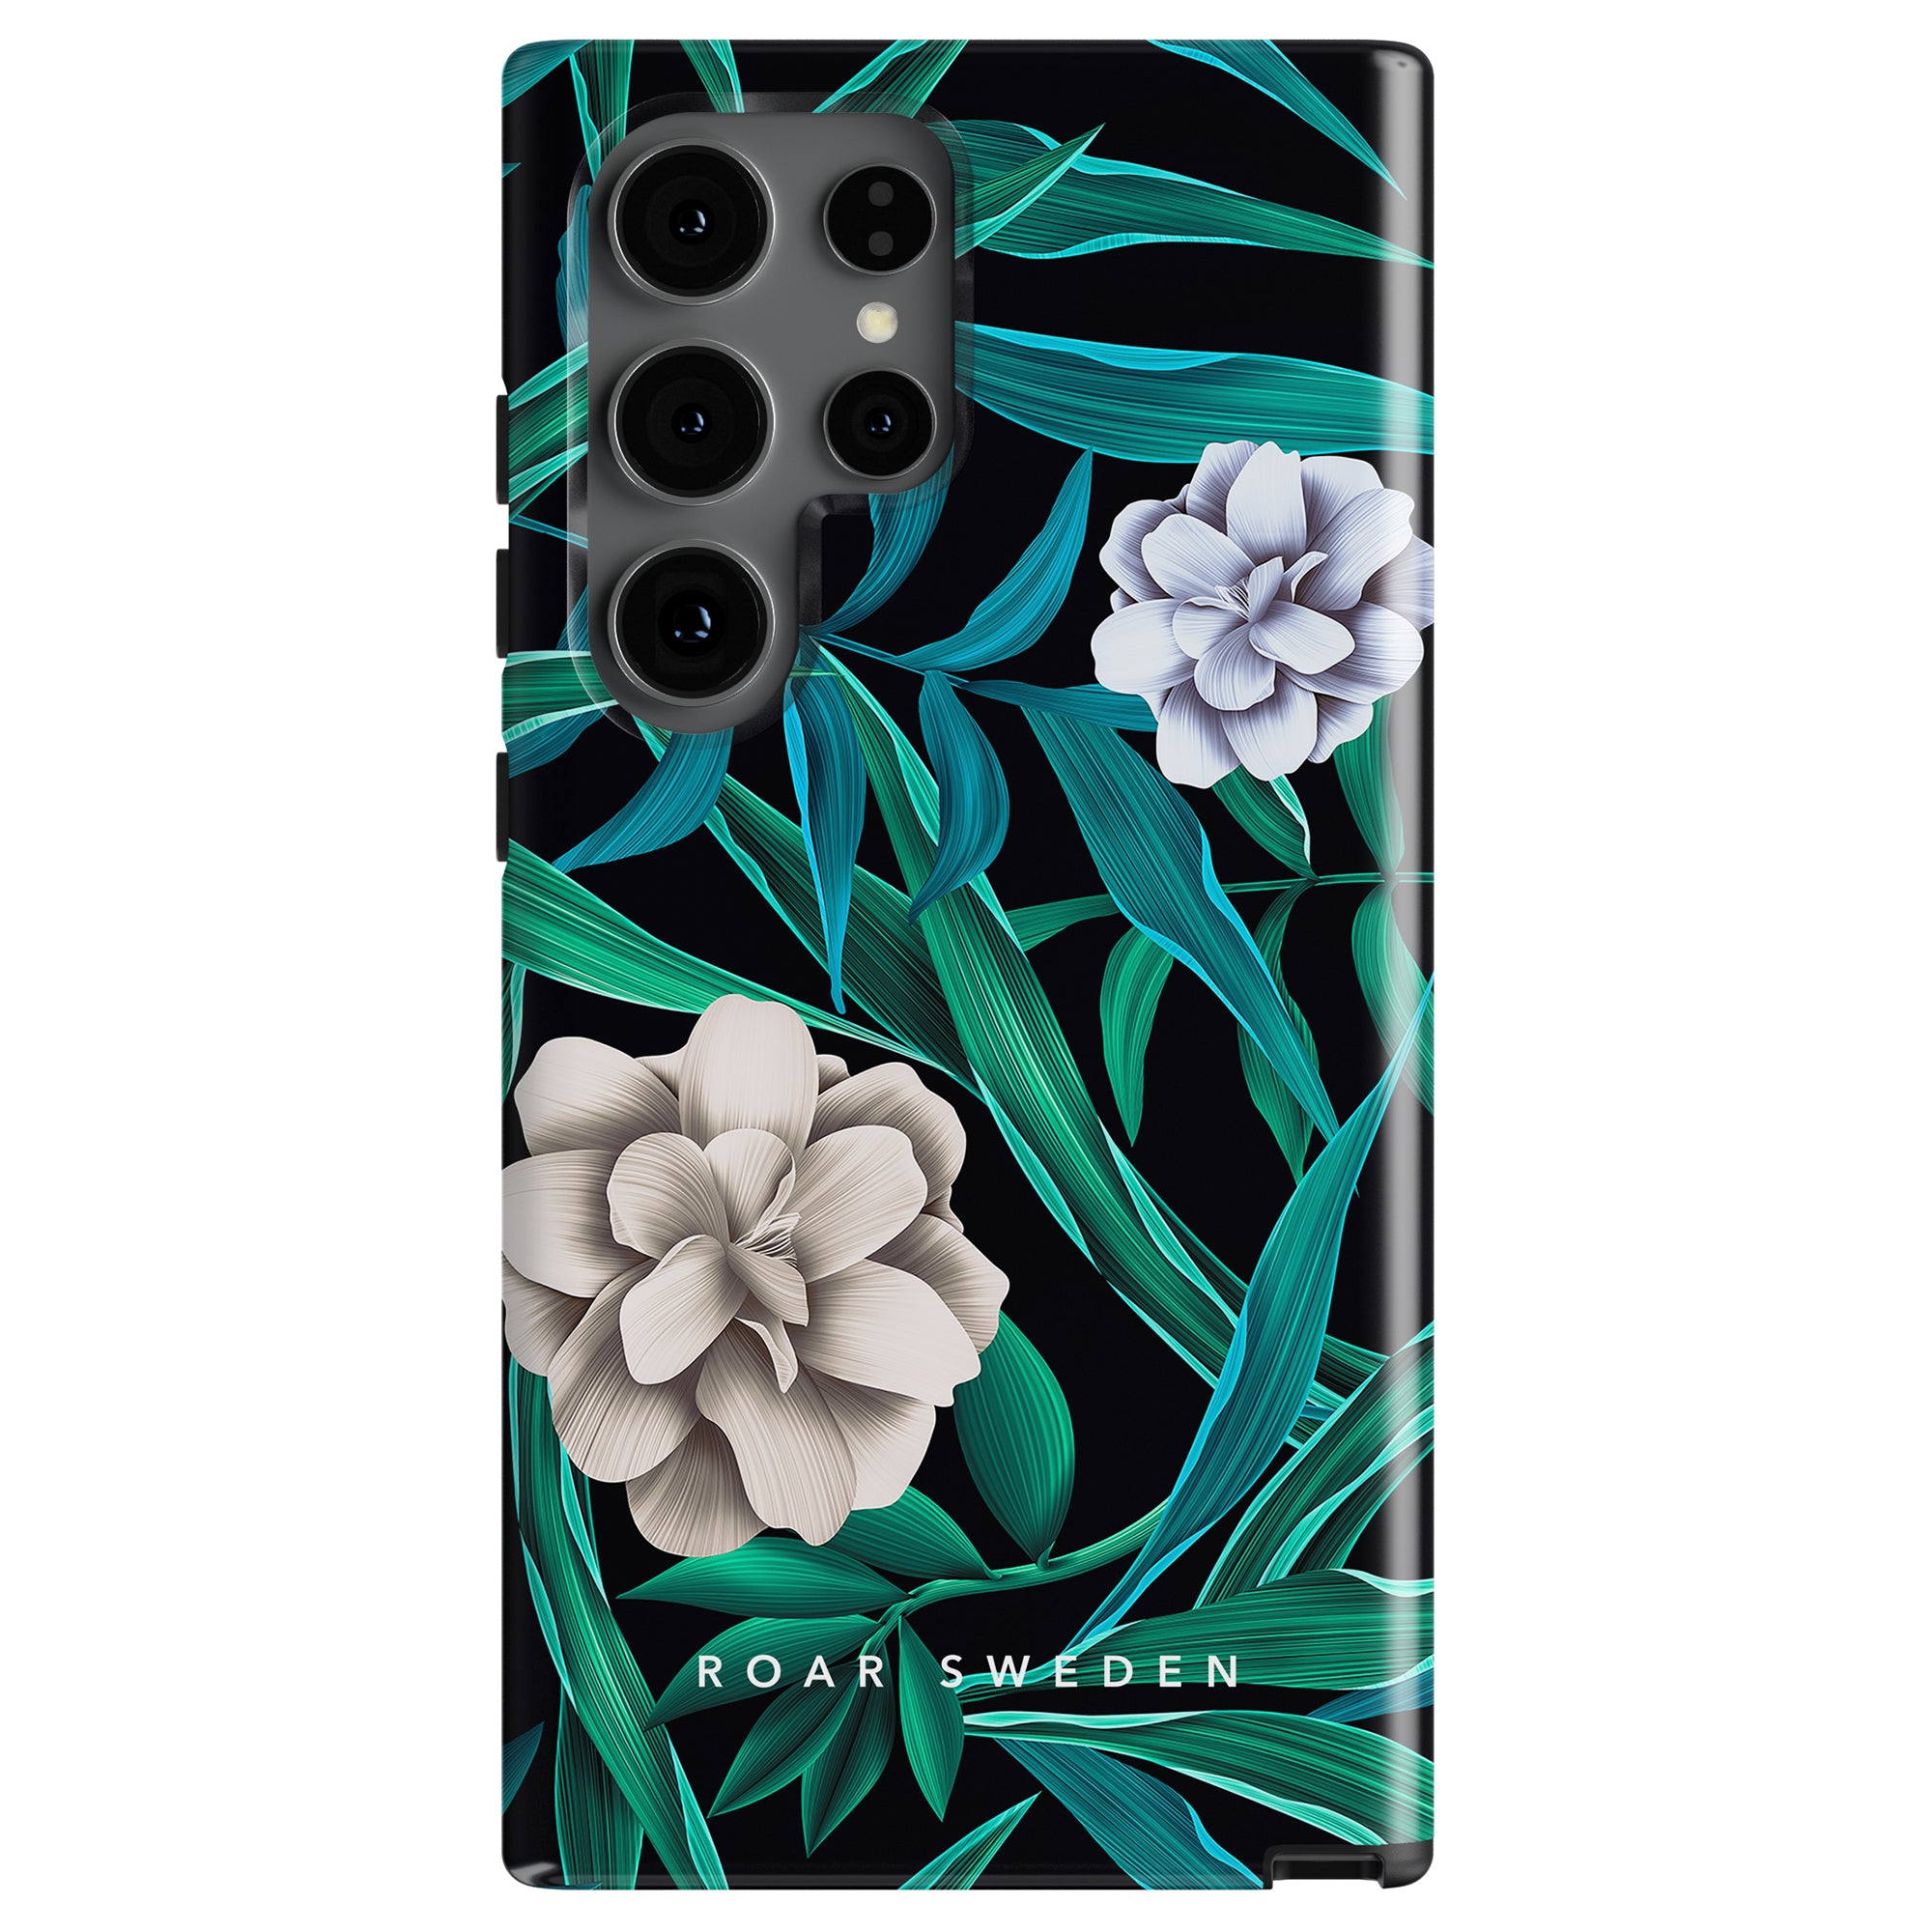 Smartphone with black Blossom - Tough Case featuring green leaves and two white flowers. Text at the bottom of the mobilskal reads "ROAR SWEDEN.